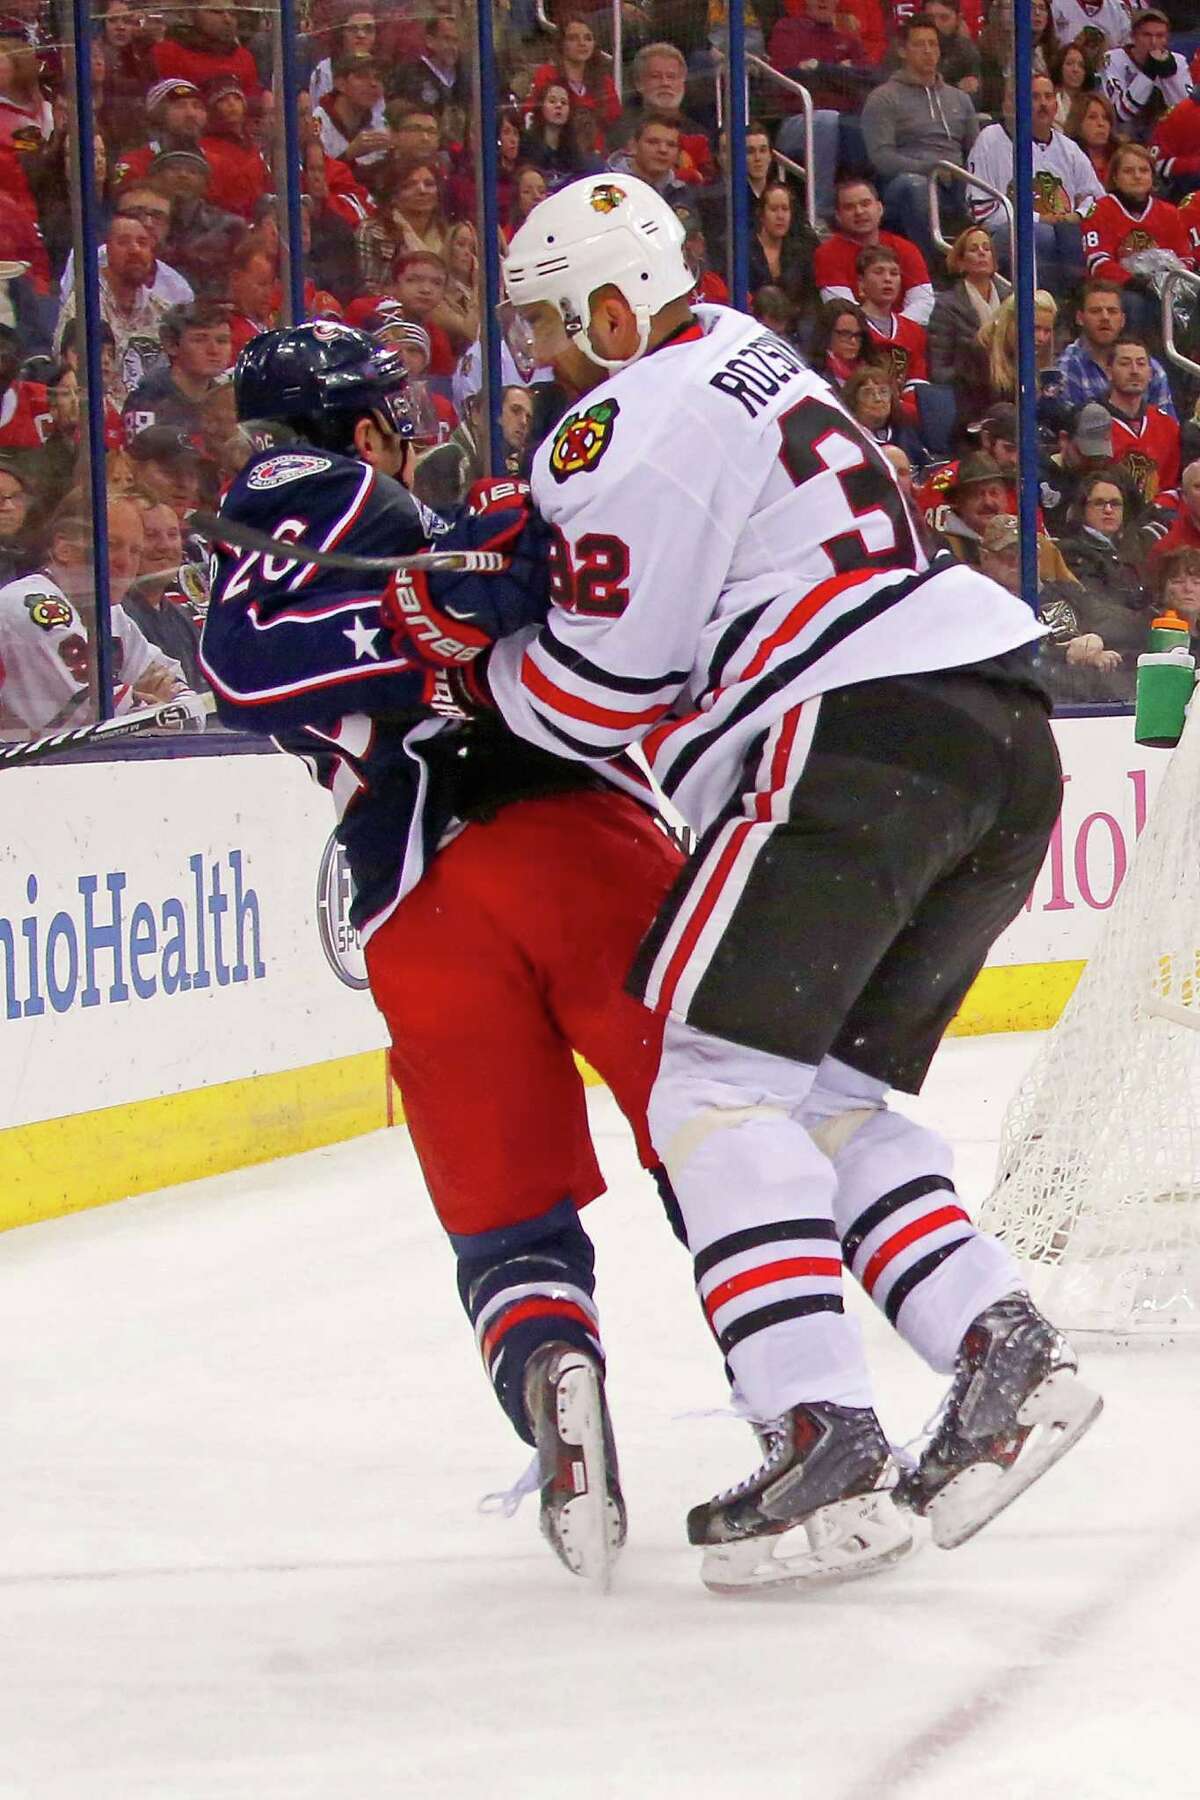 COLUMBUS, OH - DECEMBER 20: Michal Rozsival #32 of the Chicago Blackhawks checks Corey Tropp #26 of the Columbus Blue Jackets during the second period on December 20, 2014 at Nationwide Arena in Columbus, Ohio. (Photo by Kirk Irwin/Getty Images) ORG XMIT: 507048377